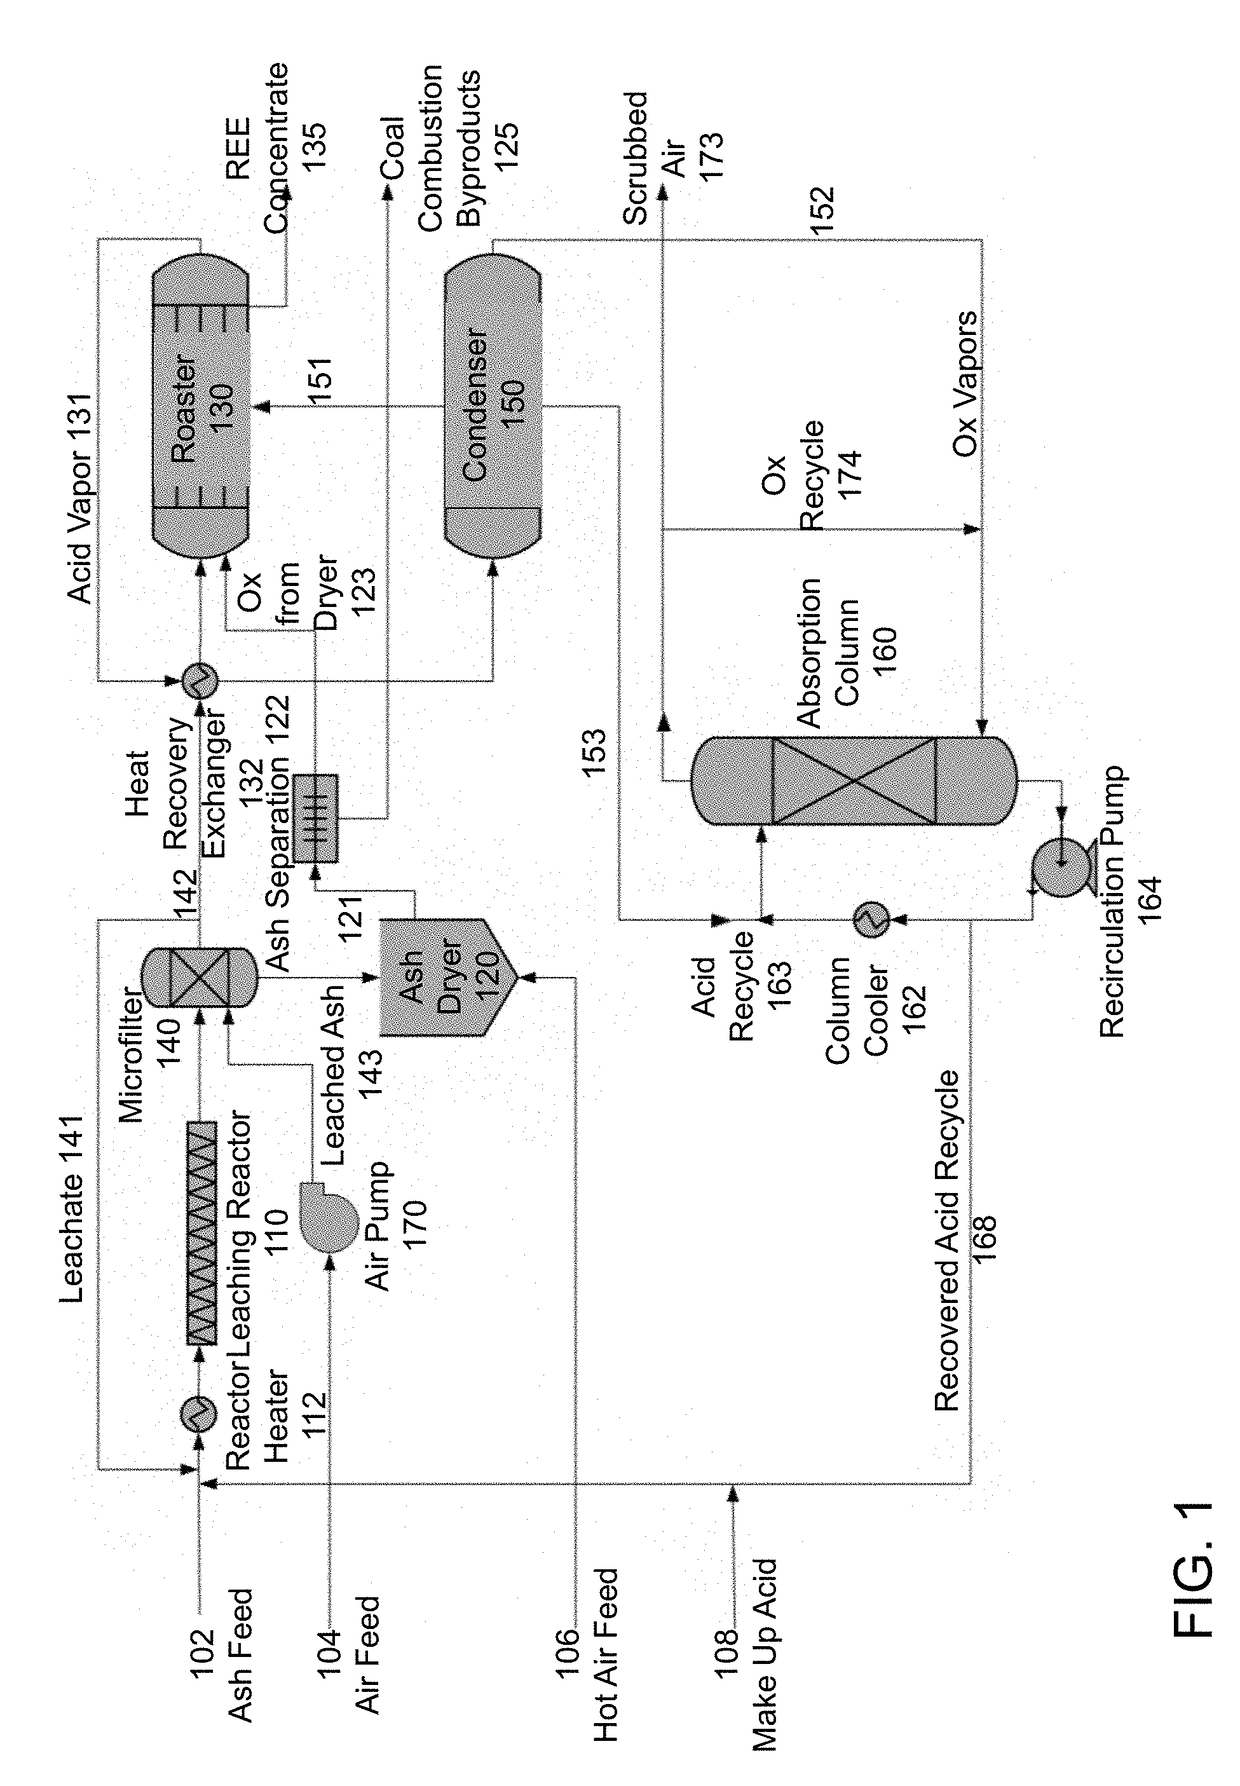 Acid digestion processes for recovery of rare earth elements from coal and coal byproducts